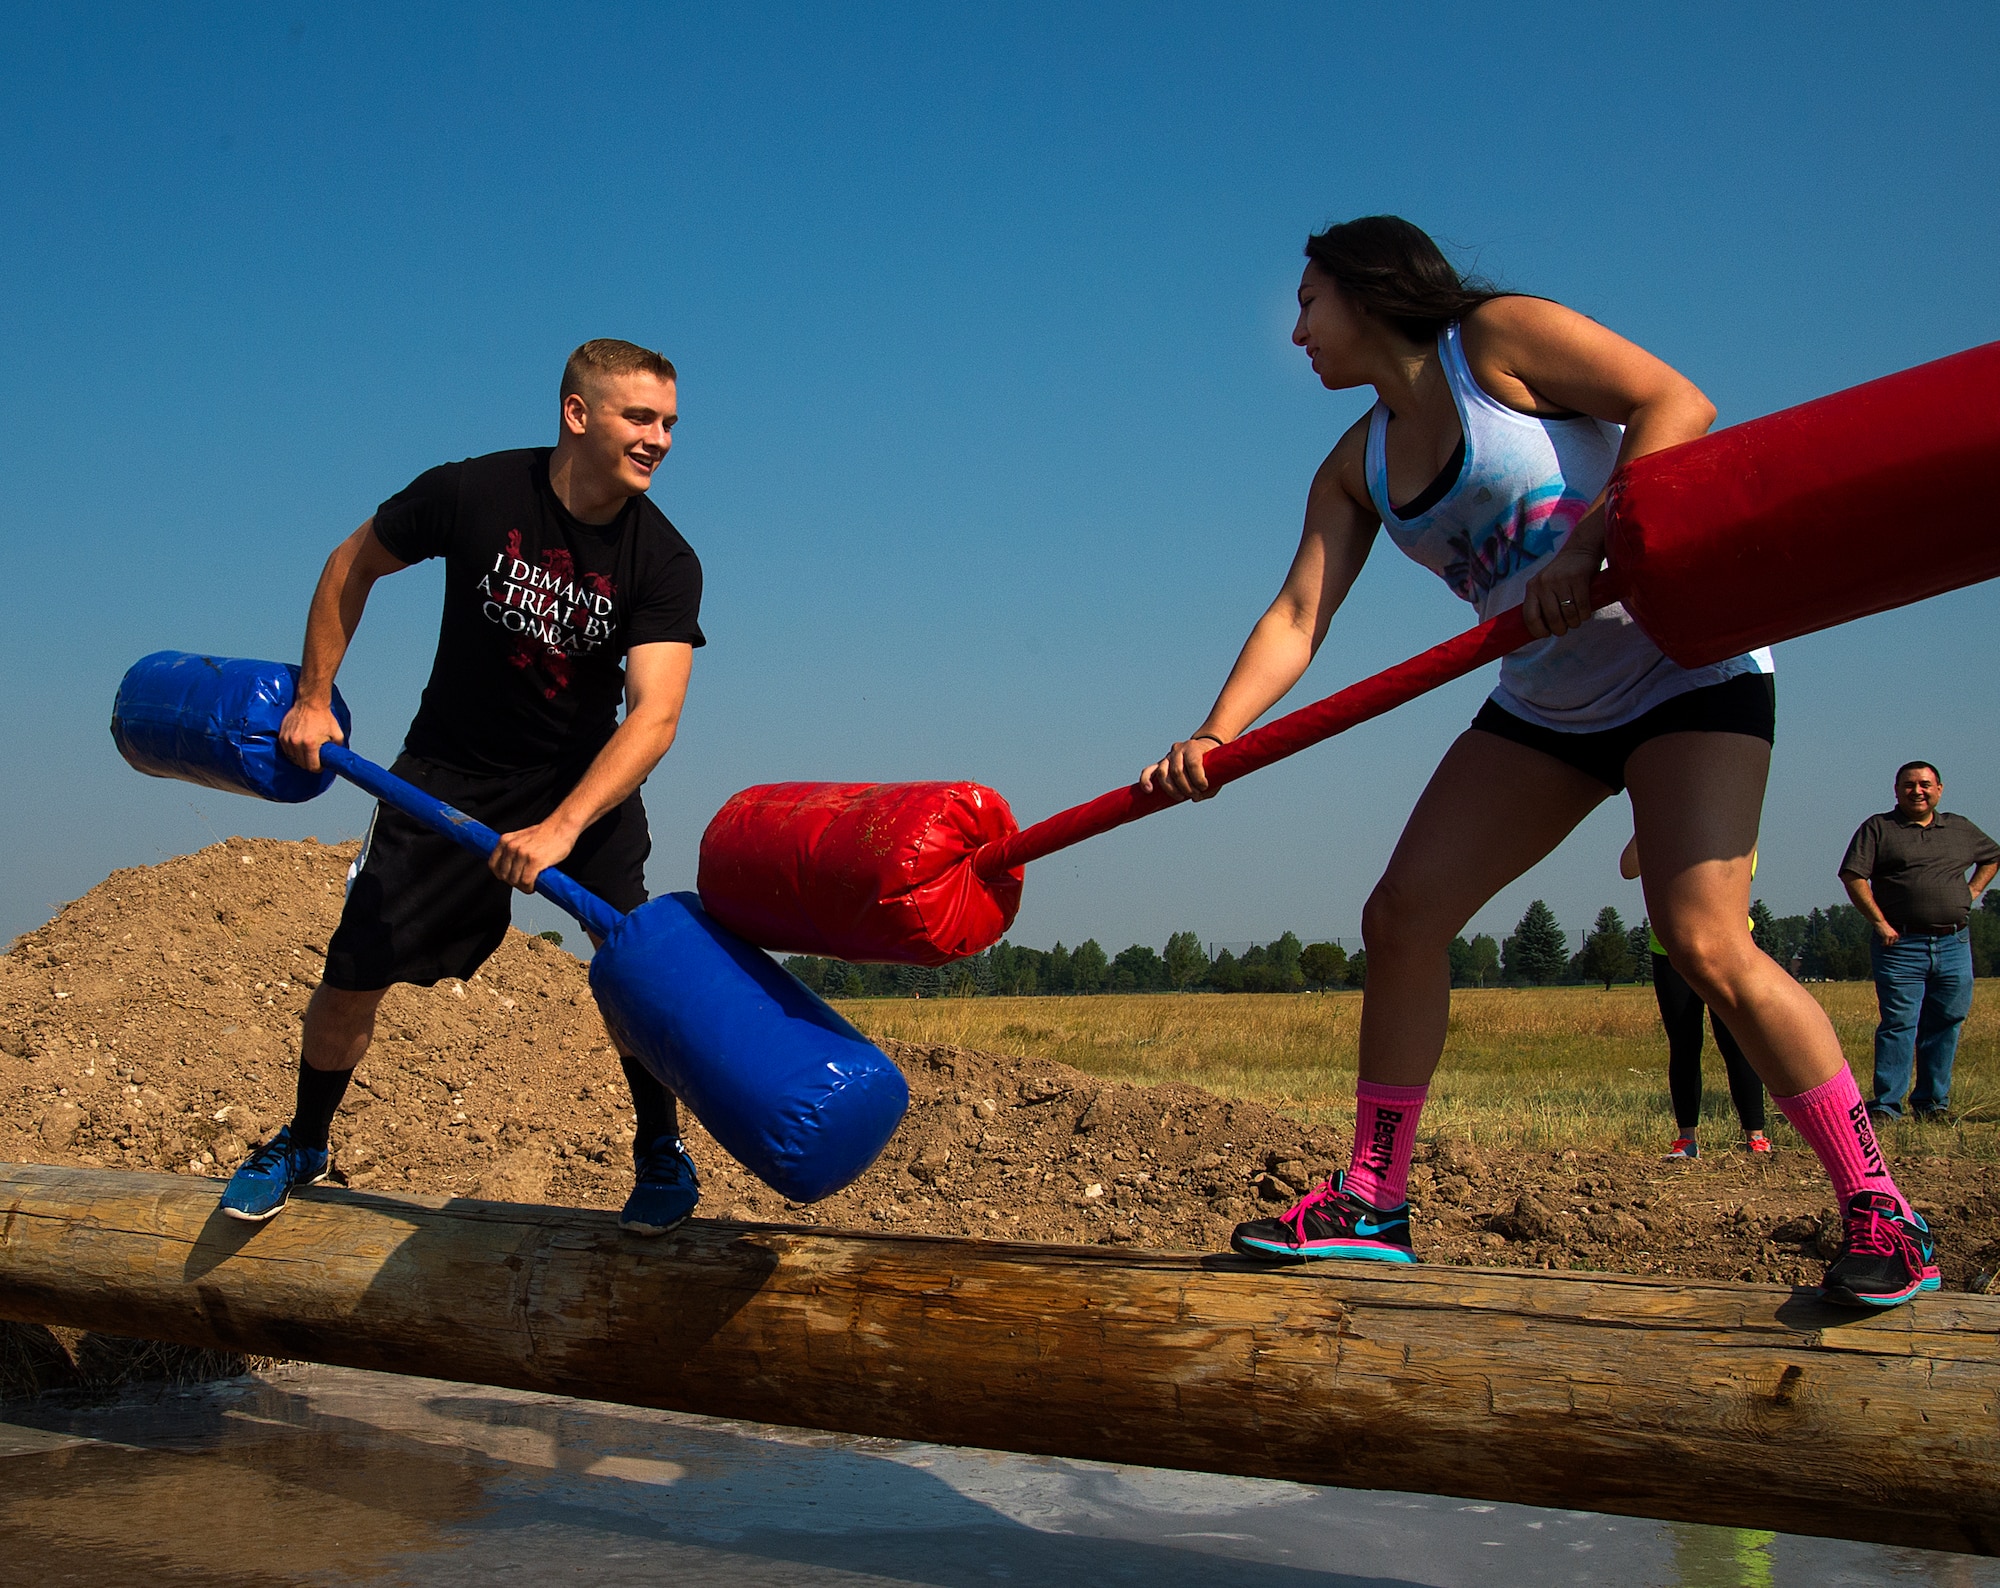 Landon Strand, 90th Medical Group, and Alexandra Ayub, 90th Force Support Squadron,  face off with pugil sticks over muddy water on F.E. Warren Air Force Base, Wyo., as they take part in a jousting competition  Aug. 21, 2015. The two were taking part in Frontiercade, which is meant to give F.E. Warren Airmen and their families a day of games, sports and free food before the start of the new school year. (U.S. Air Force photos by R.J. Oriez/Released)